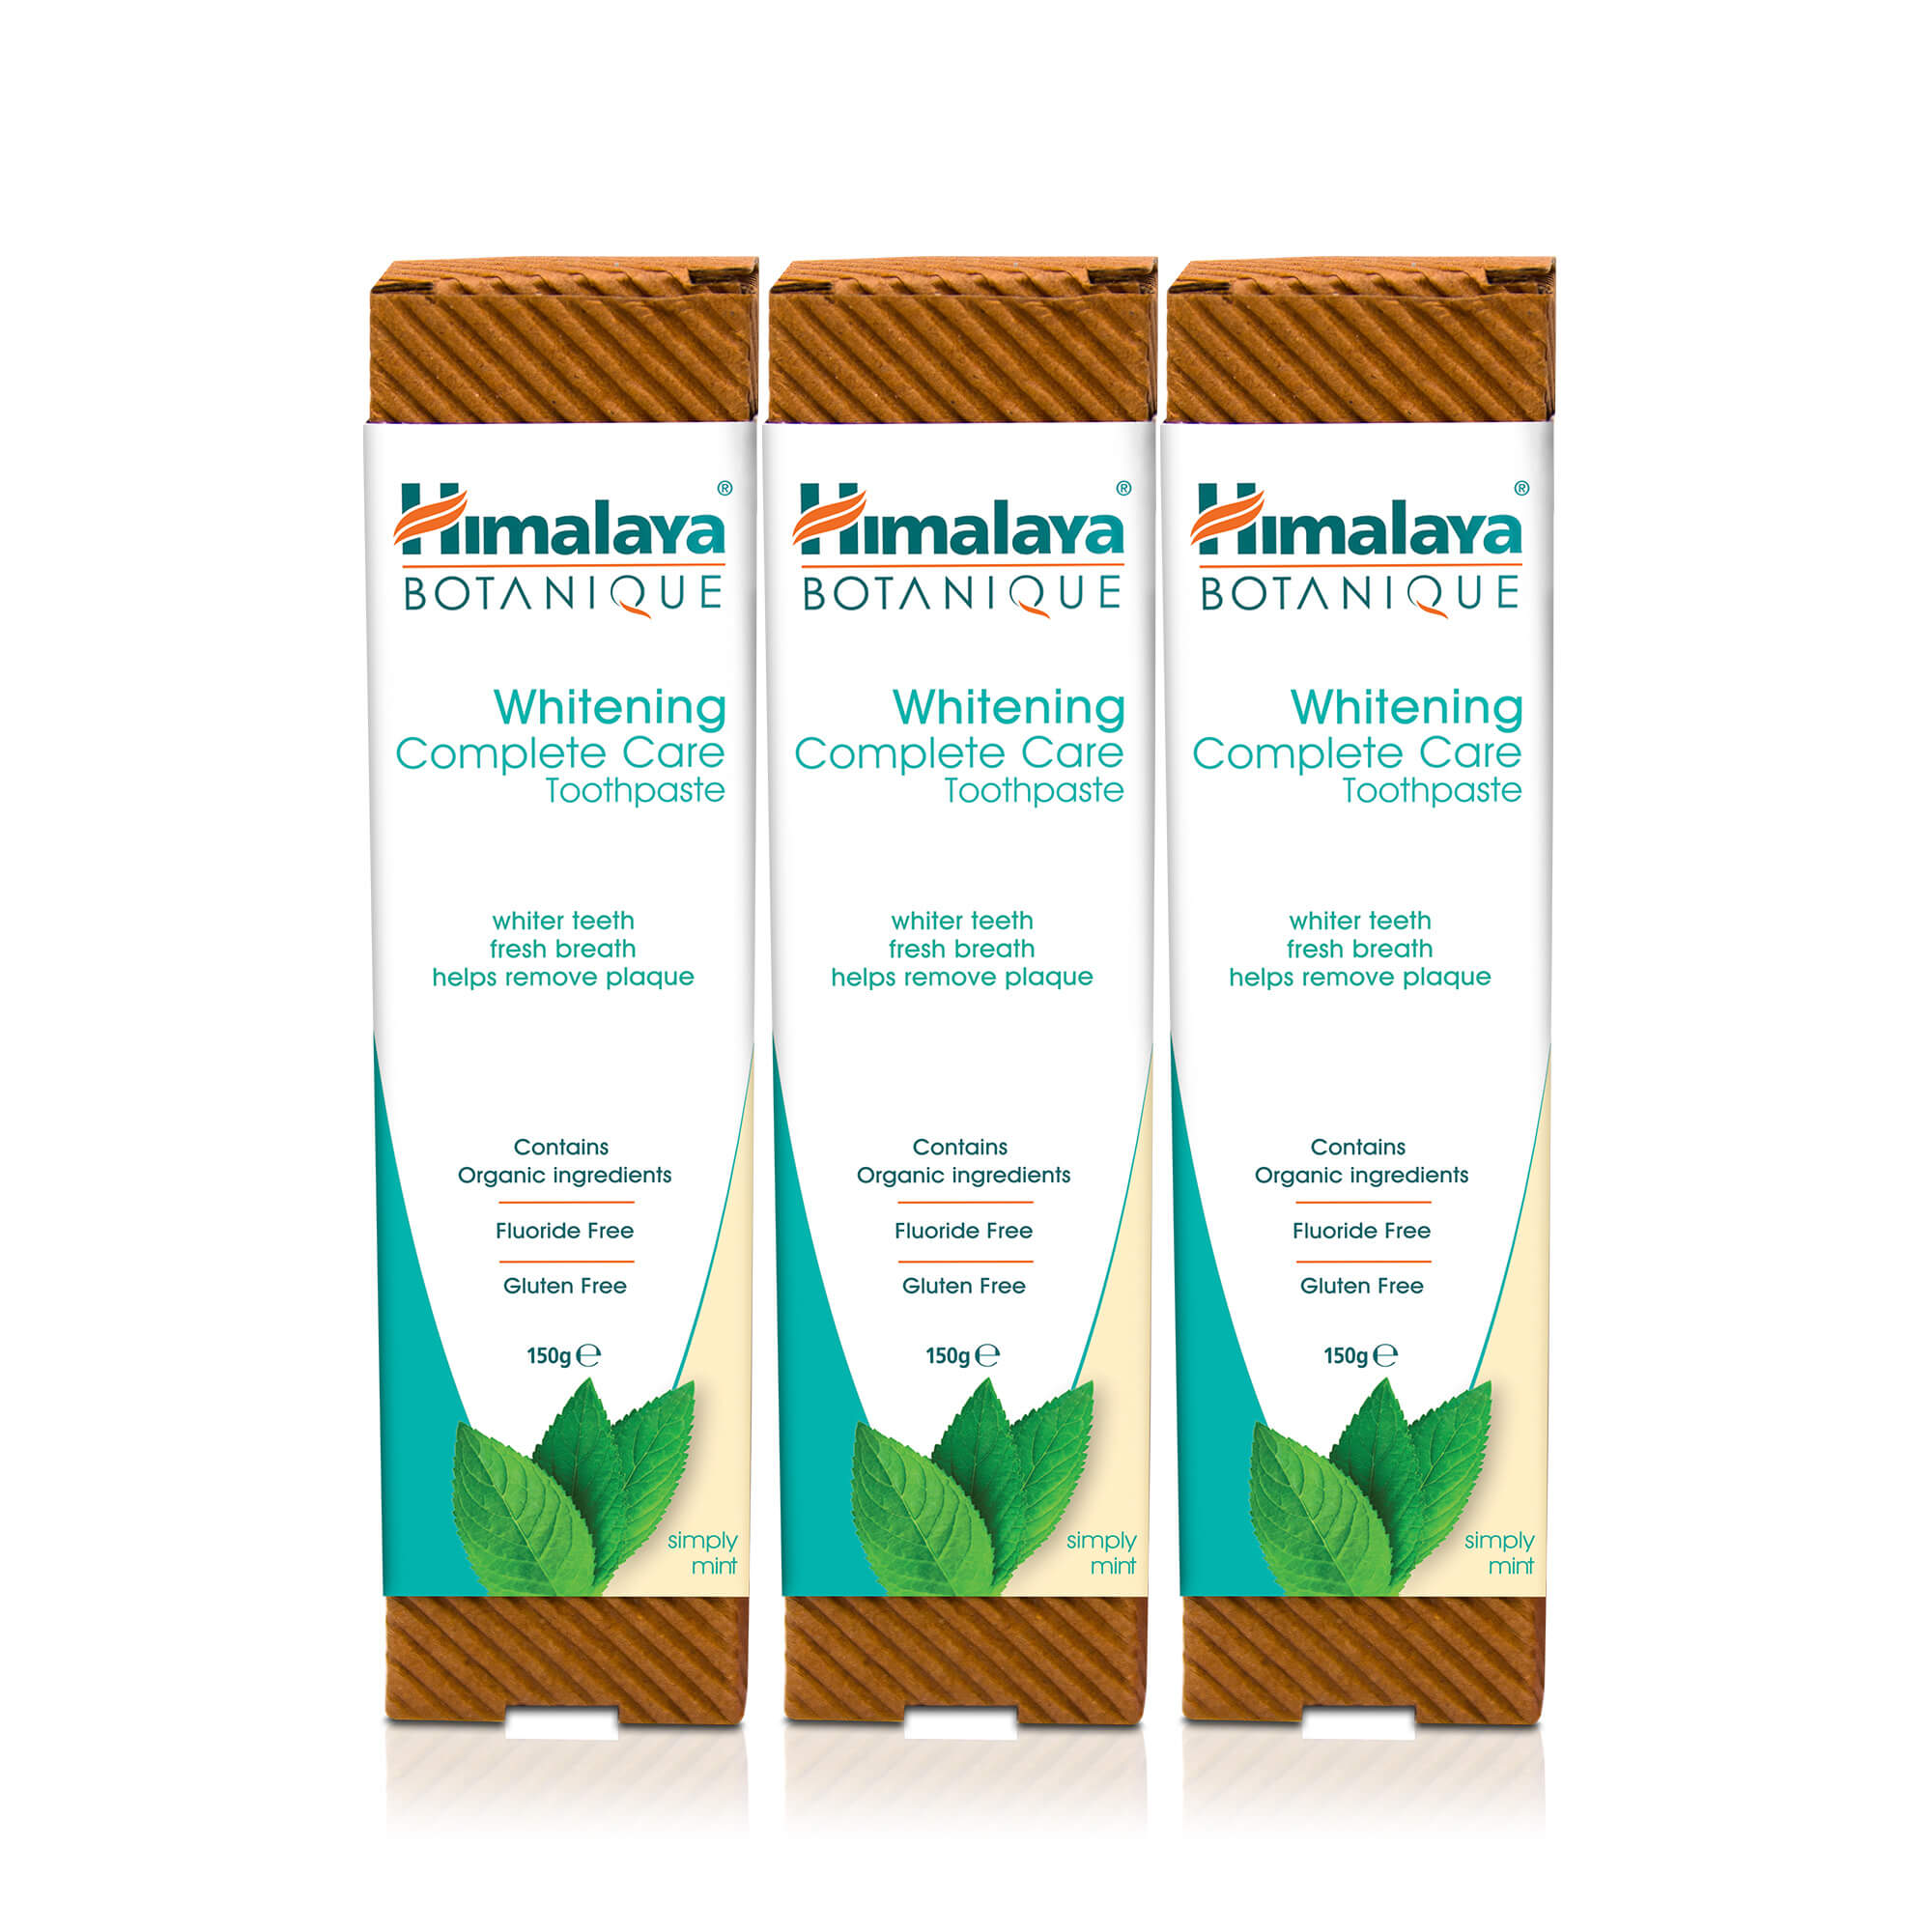 Himalaya BOTANIQUE Whitening Complete Care Toothpaste - Simply Mint - 150g (Pack of 3)